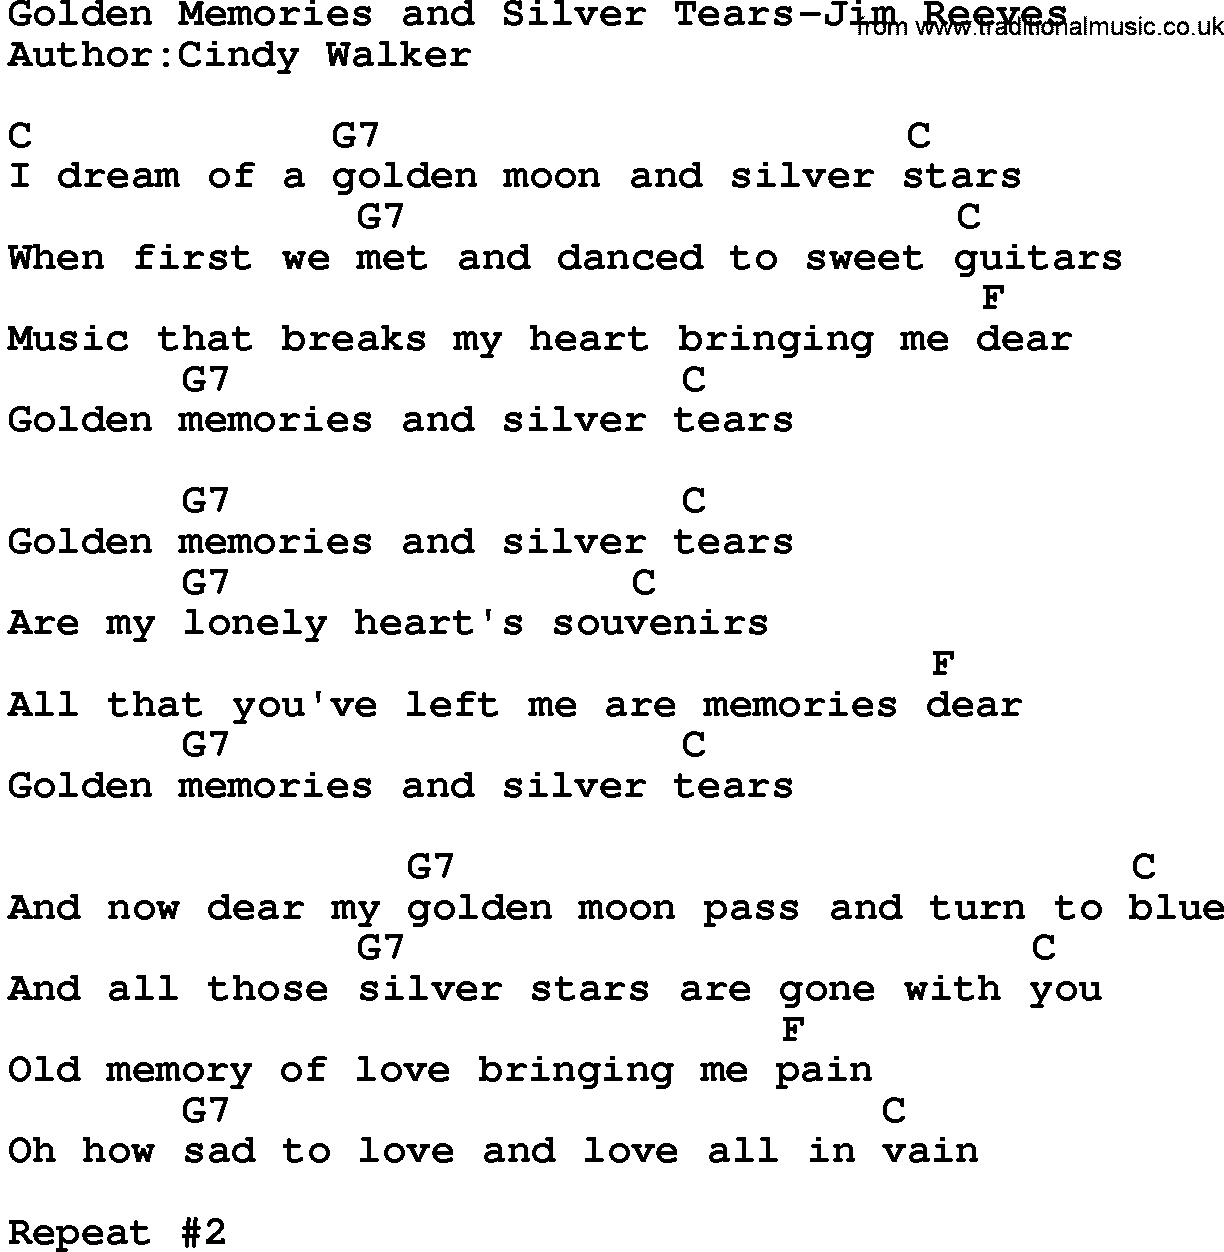 Country music song: Golden Memories And Silver Tears-Jim Reeves lyrics and chords